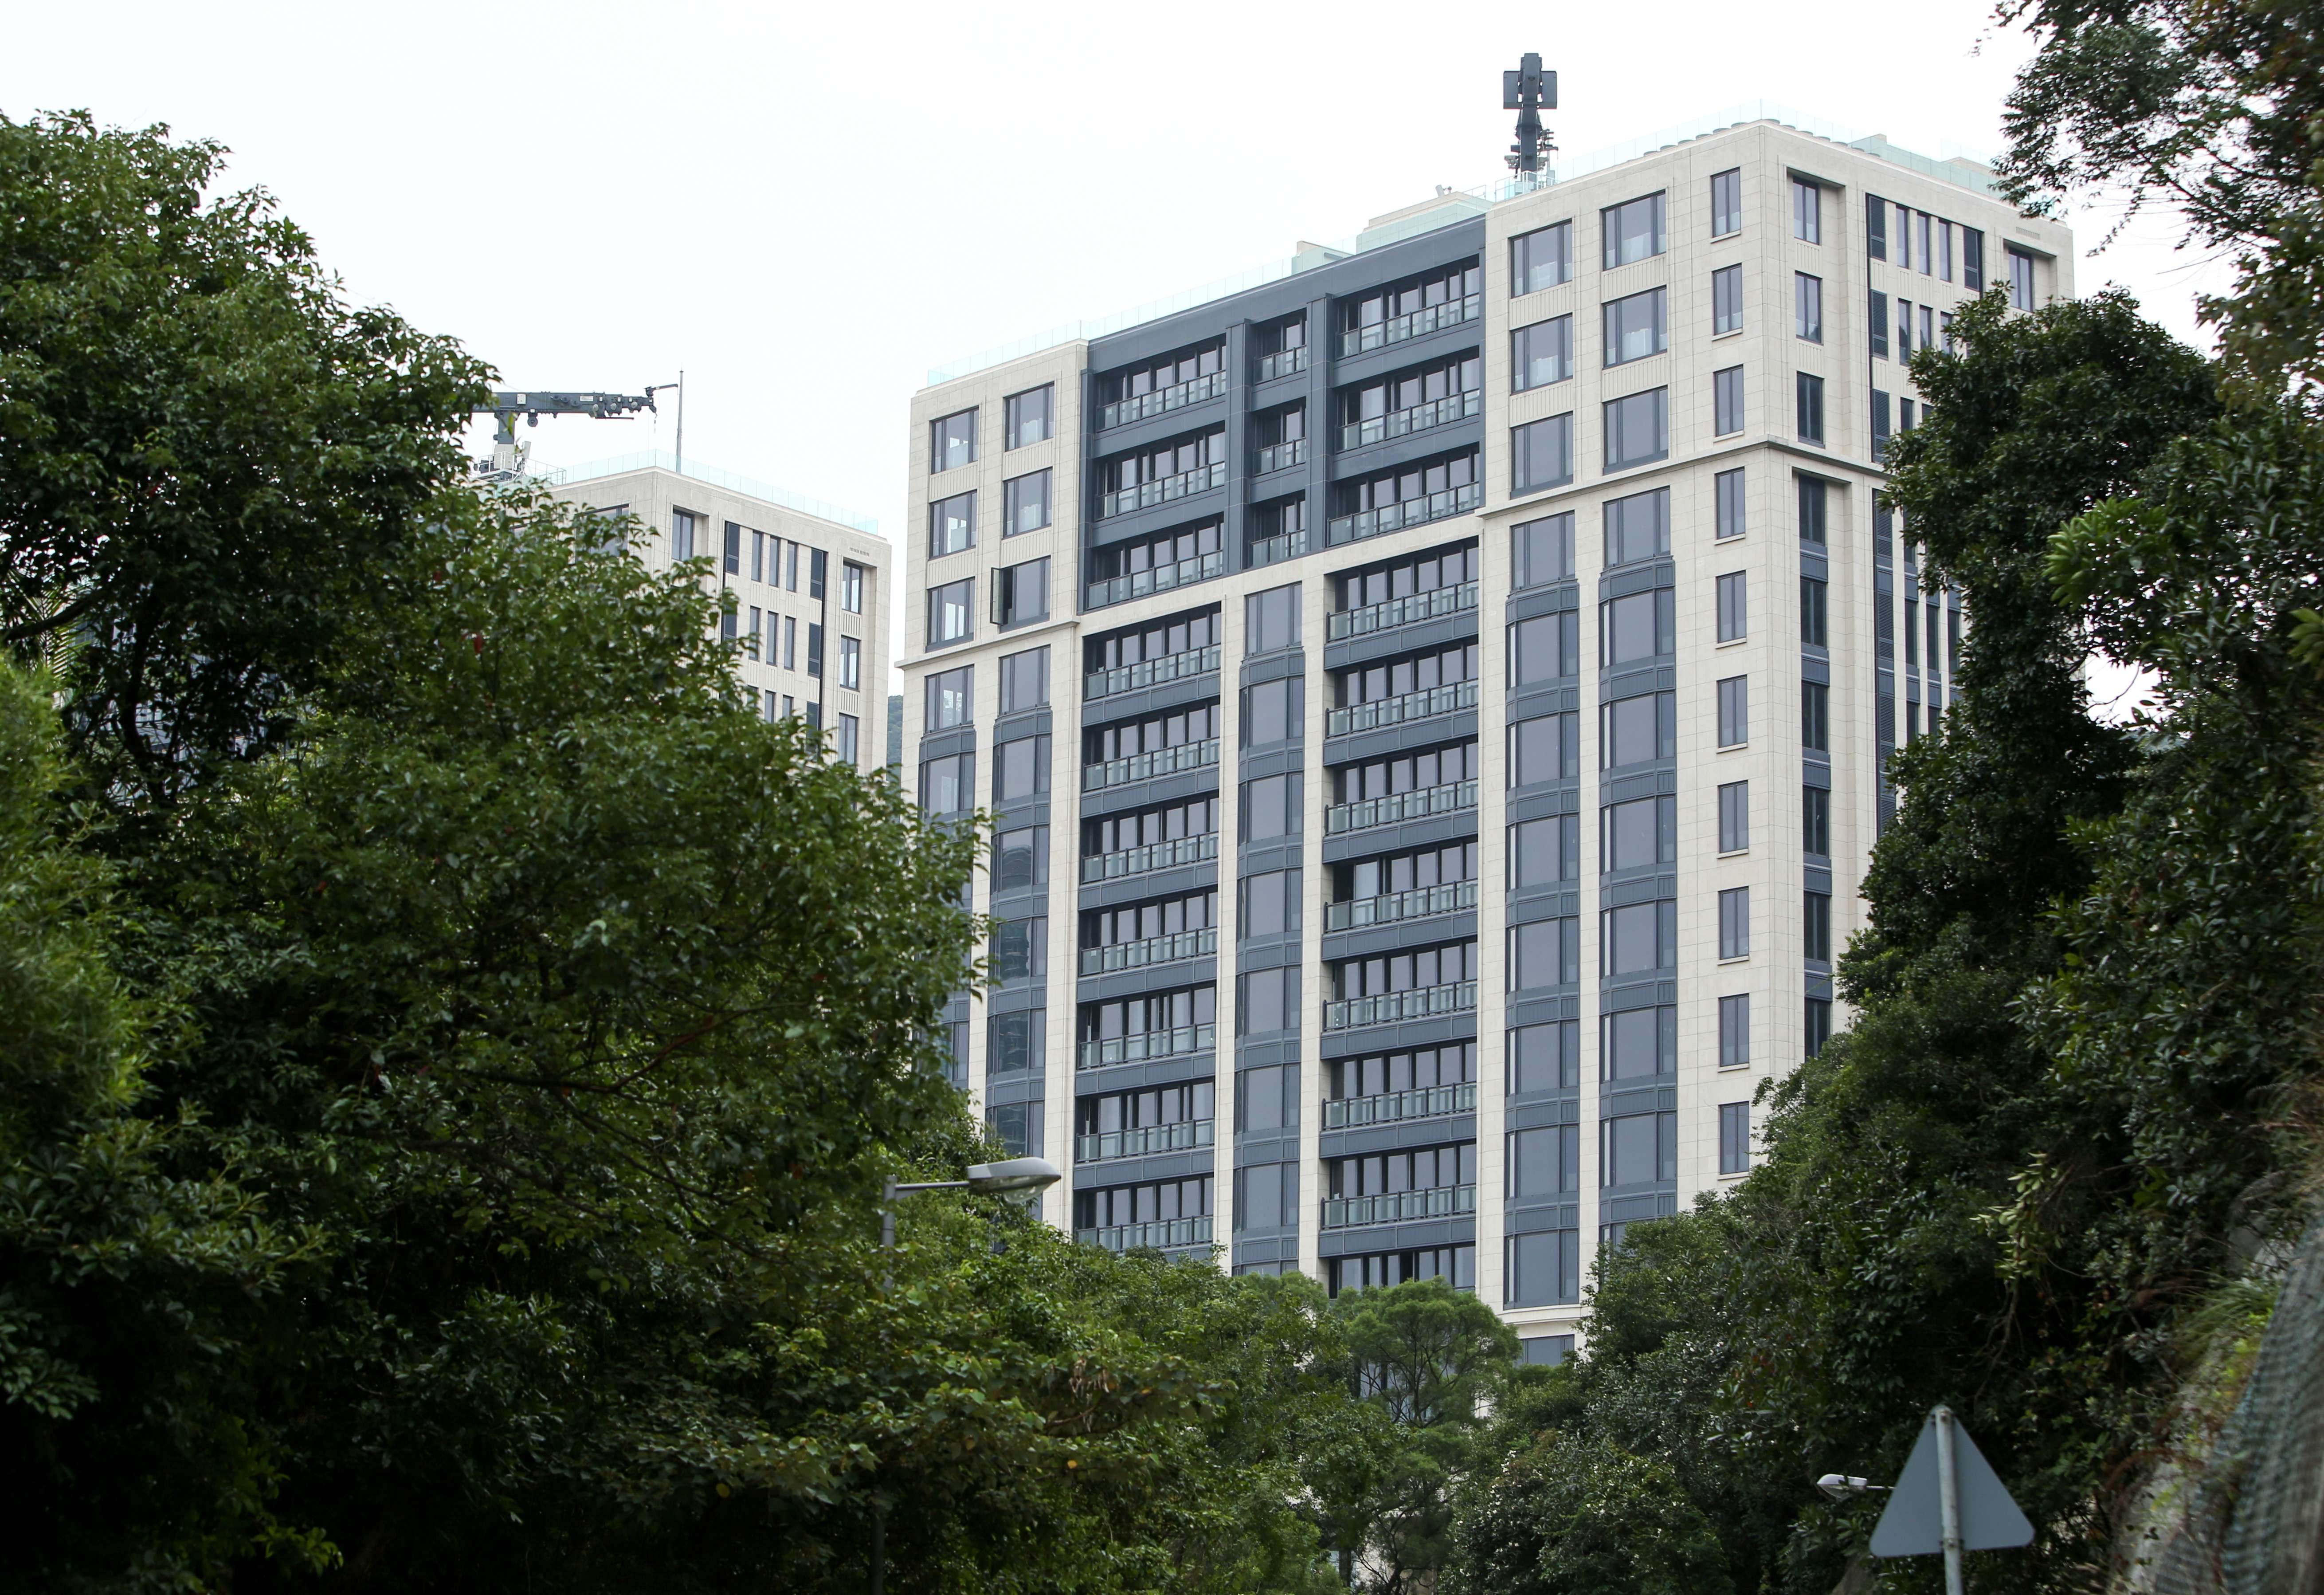 Mount Nicholson at The Peak, home to some of Hong Kong’s wealthiest families, set the record for Asia’s most expensive apartments when property tycoon Edwin Leong and a family member paid HK$1.22 billion for three units. Photo: Edmond So